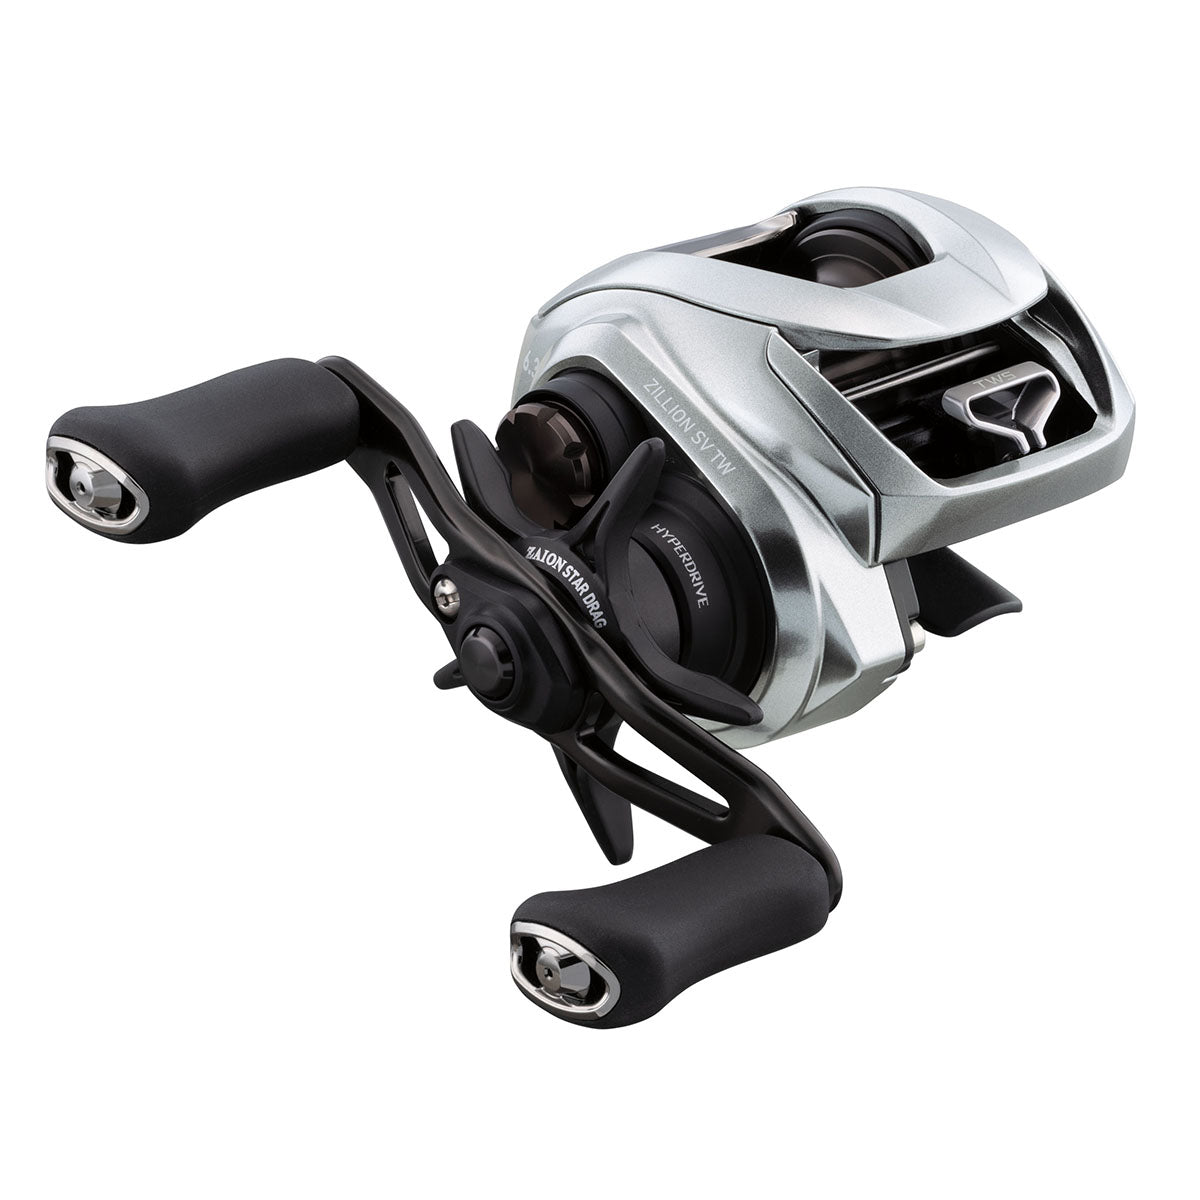 Daiwa Zillion Sv Tw Casting Reels - Copperstate Tackle